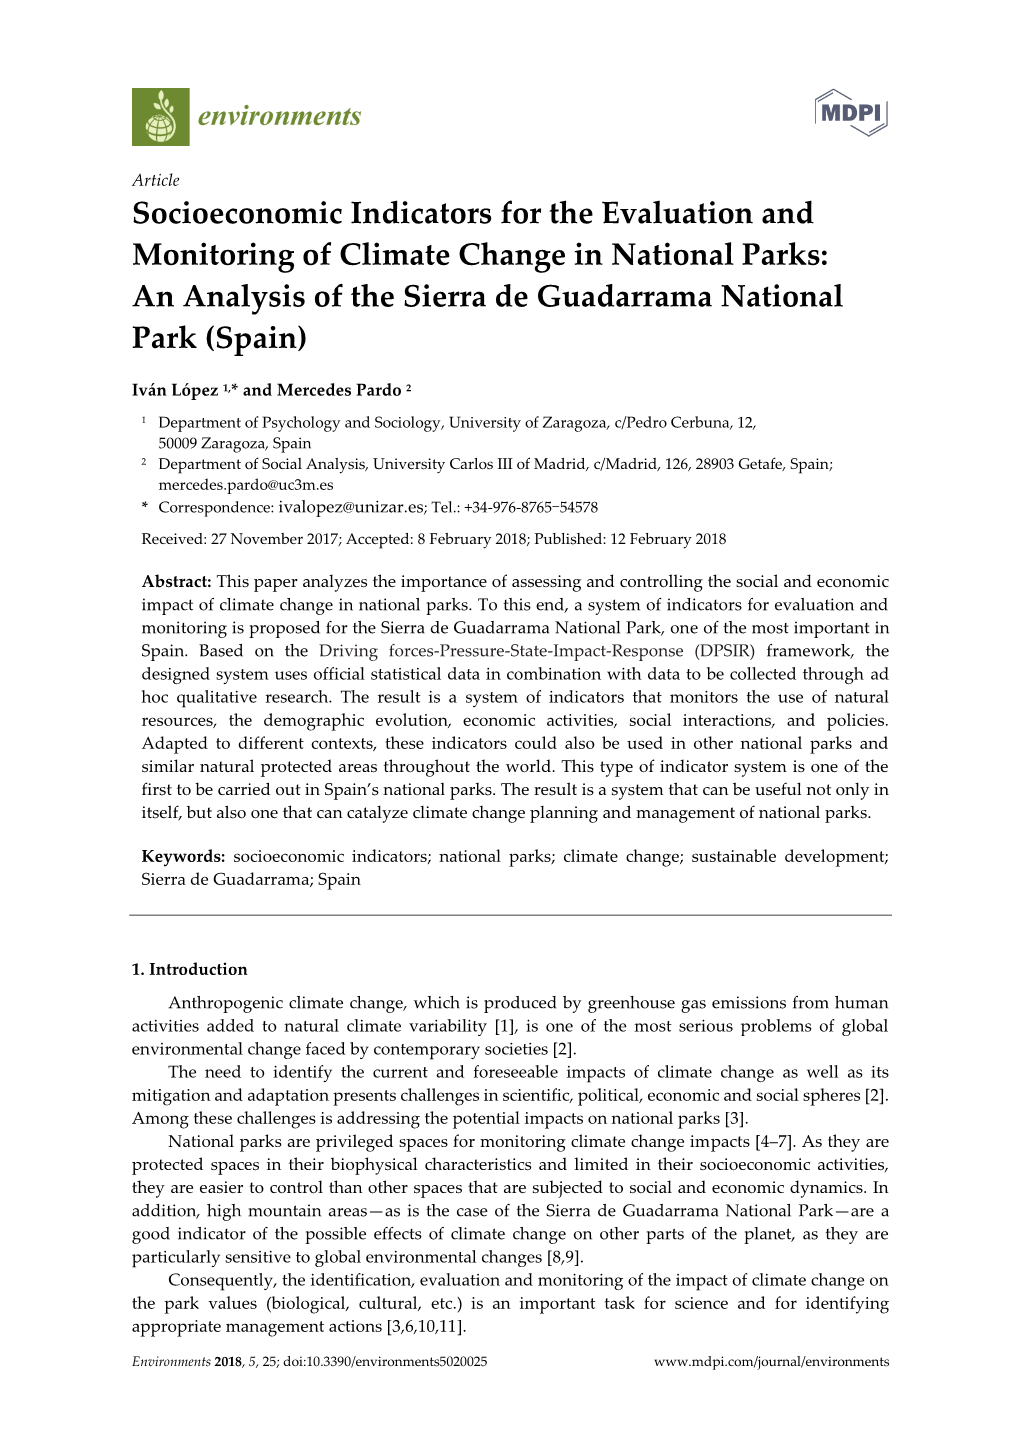 Socioeconomic Indicators for the Evaluation and Monitoring of Climate Change in National Parks: an Analysis of the Sierra De Guadarrama National Park (Spain)